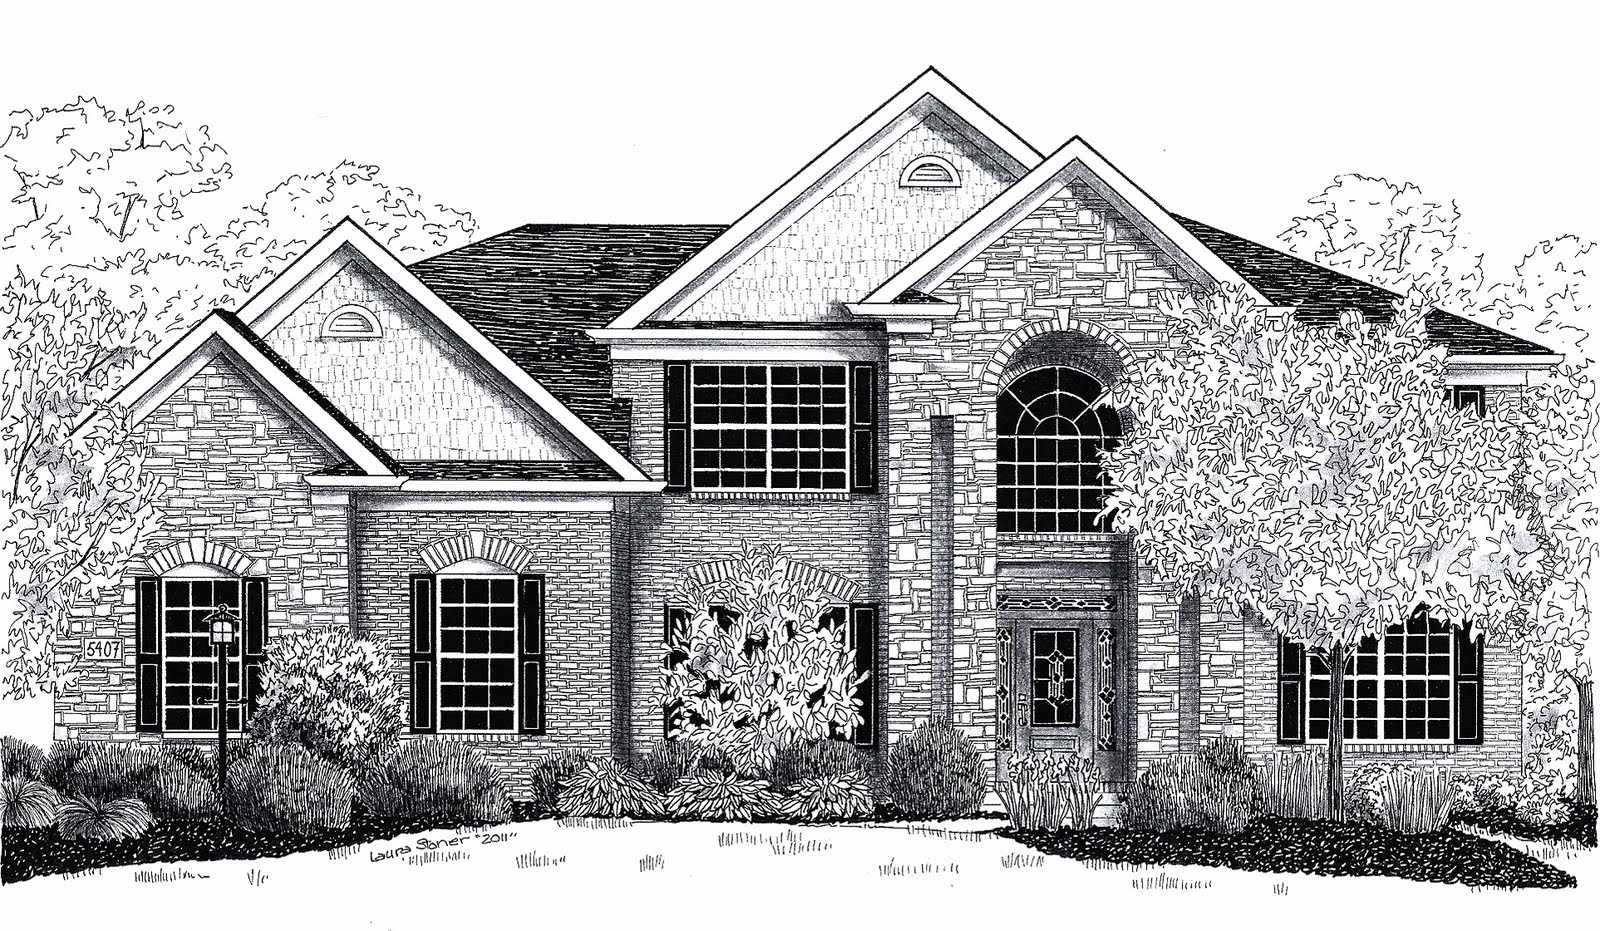 Crazy Linez: House drawings